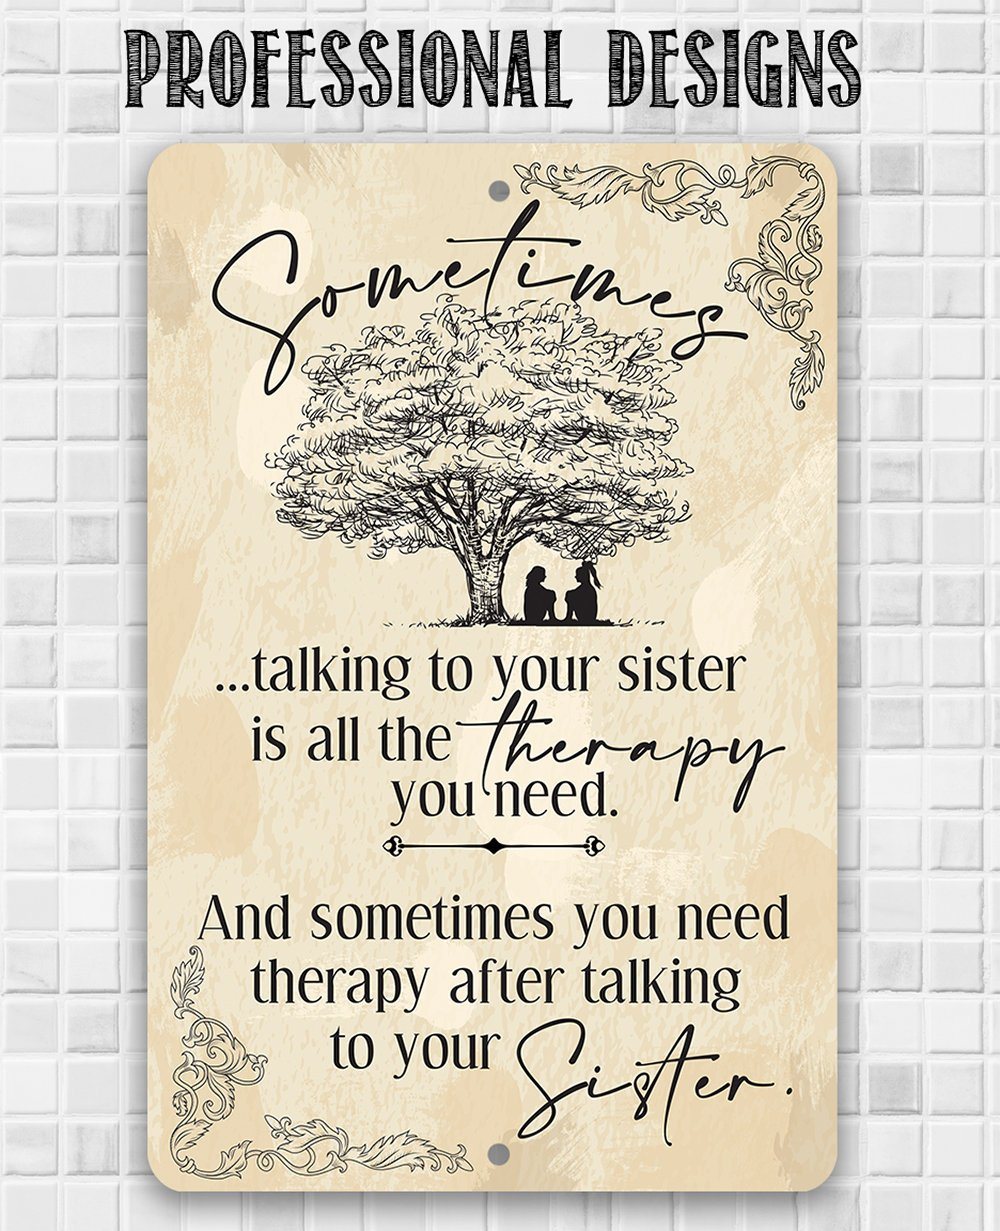 Sometimes Talking to Your Sister is All the Therapy You Need - Metal Sign | Lone Star Art.